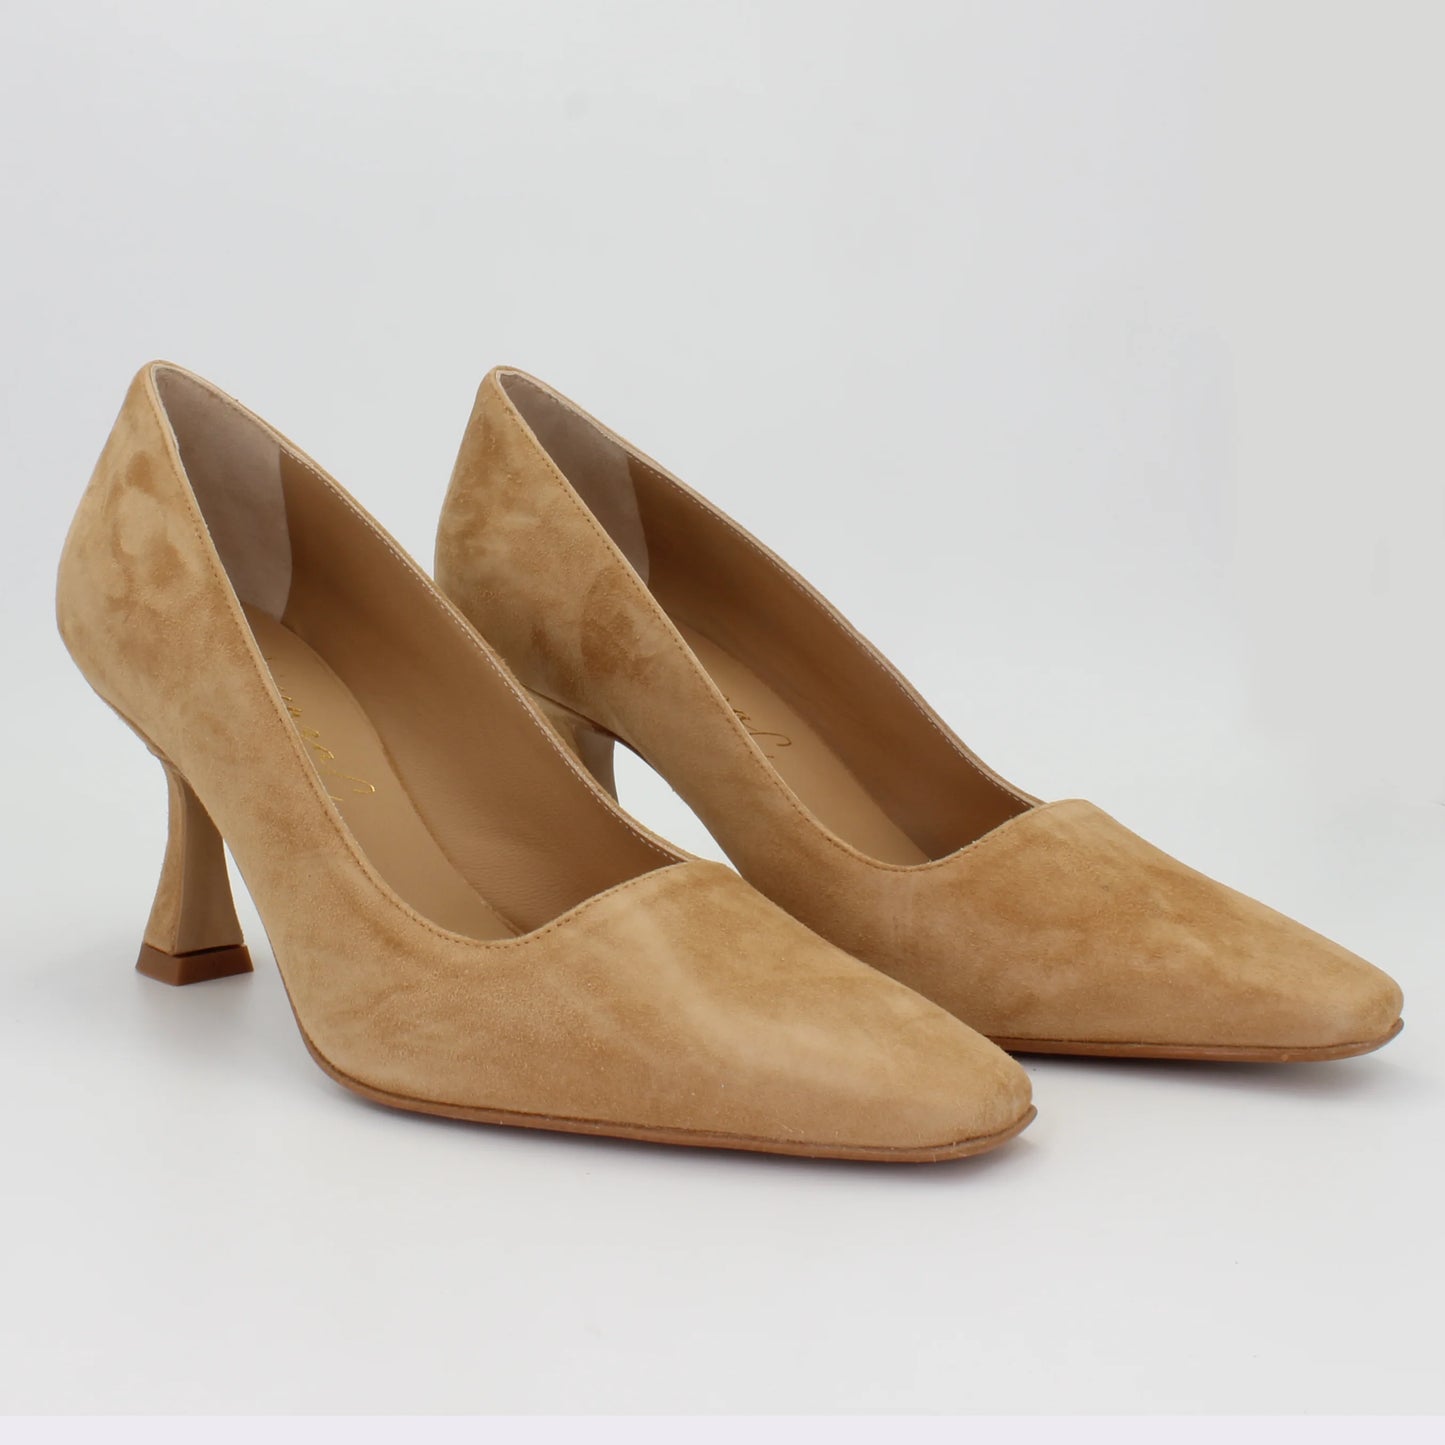 Shop Handmade Italian Leather Suede Heel in Legno (V51) or browse our range of hand-made Italian shoes for women in leather or suede in-store at Aliverti Cape Town, or shop online. We deliver in South Africa & offer multiple payment plans as well as accept multiple safe & secure payment methods.